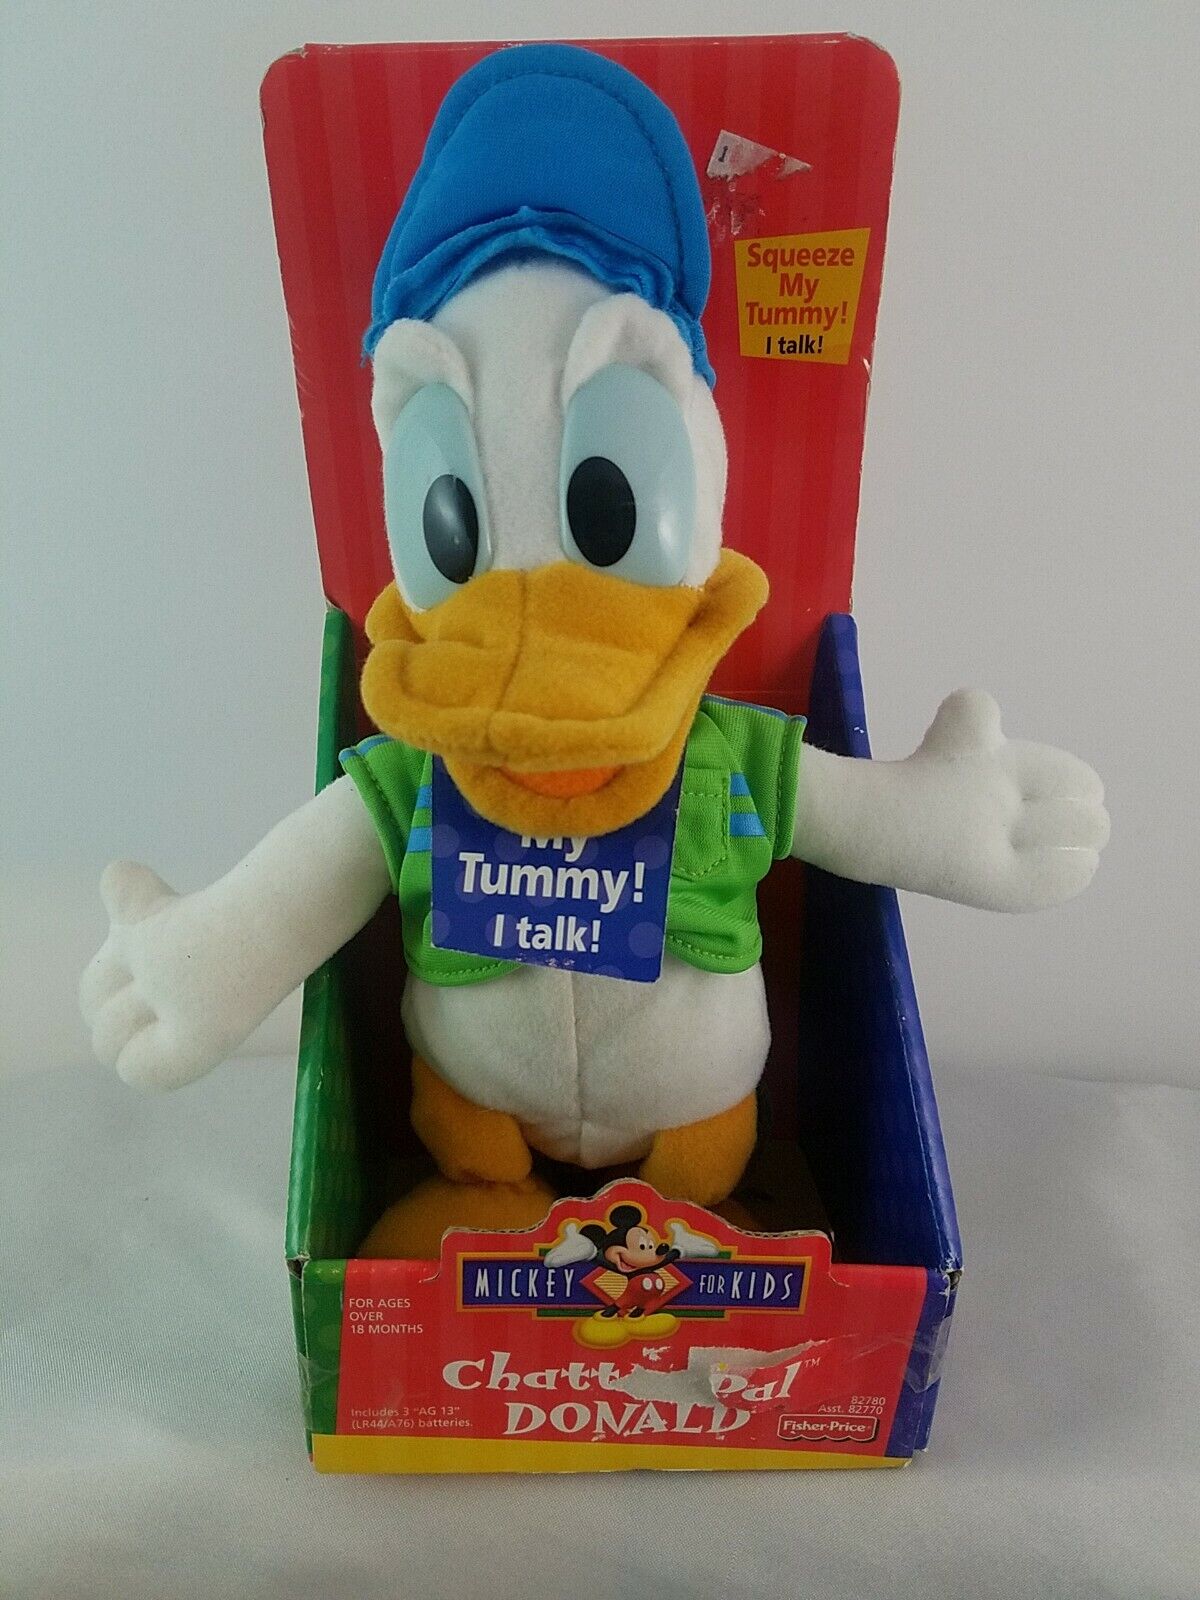 Vintage Fisher Price Chatter Pal Donald Duck Mickey For Kids Talking Plush Doll